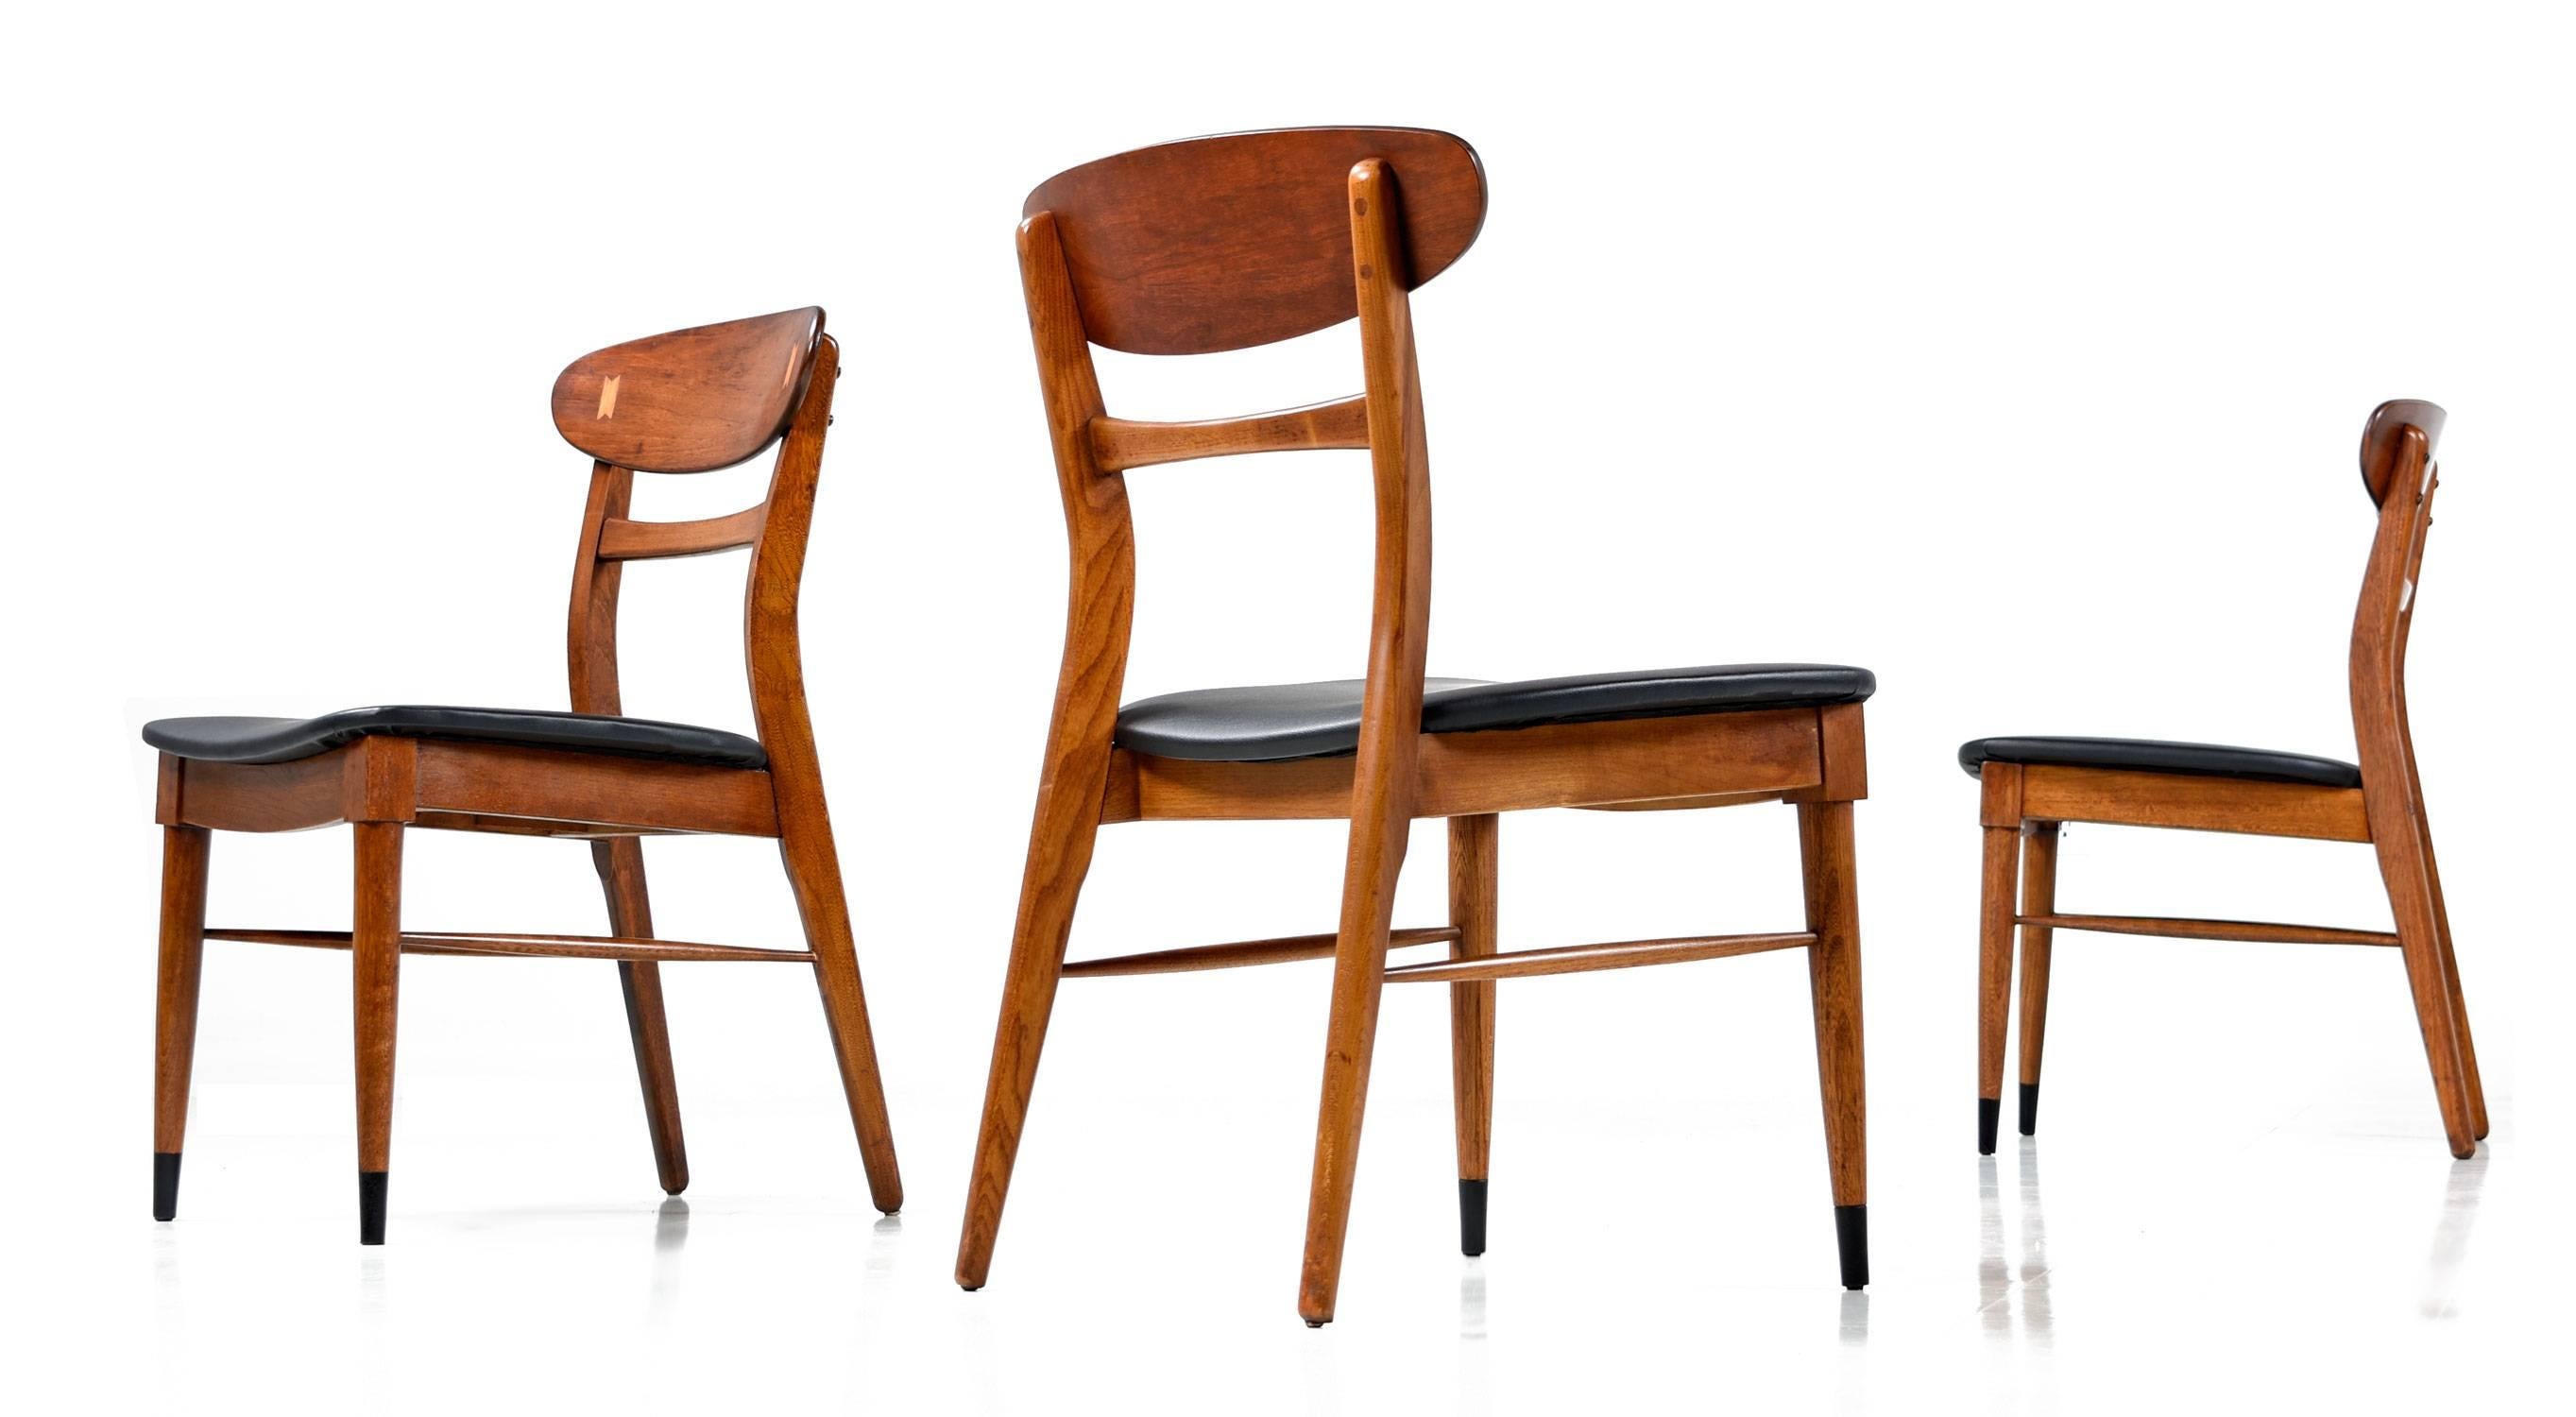 Rare set of eight Mid-Century Modern Lane Acclaim dining chairs. Lane's Acclaim line is one of the most beloved and collected series of American Mid-Century Modern furniture. The solid walnut frames feature novel period styling informed by Danish